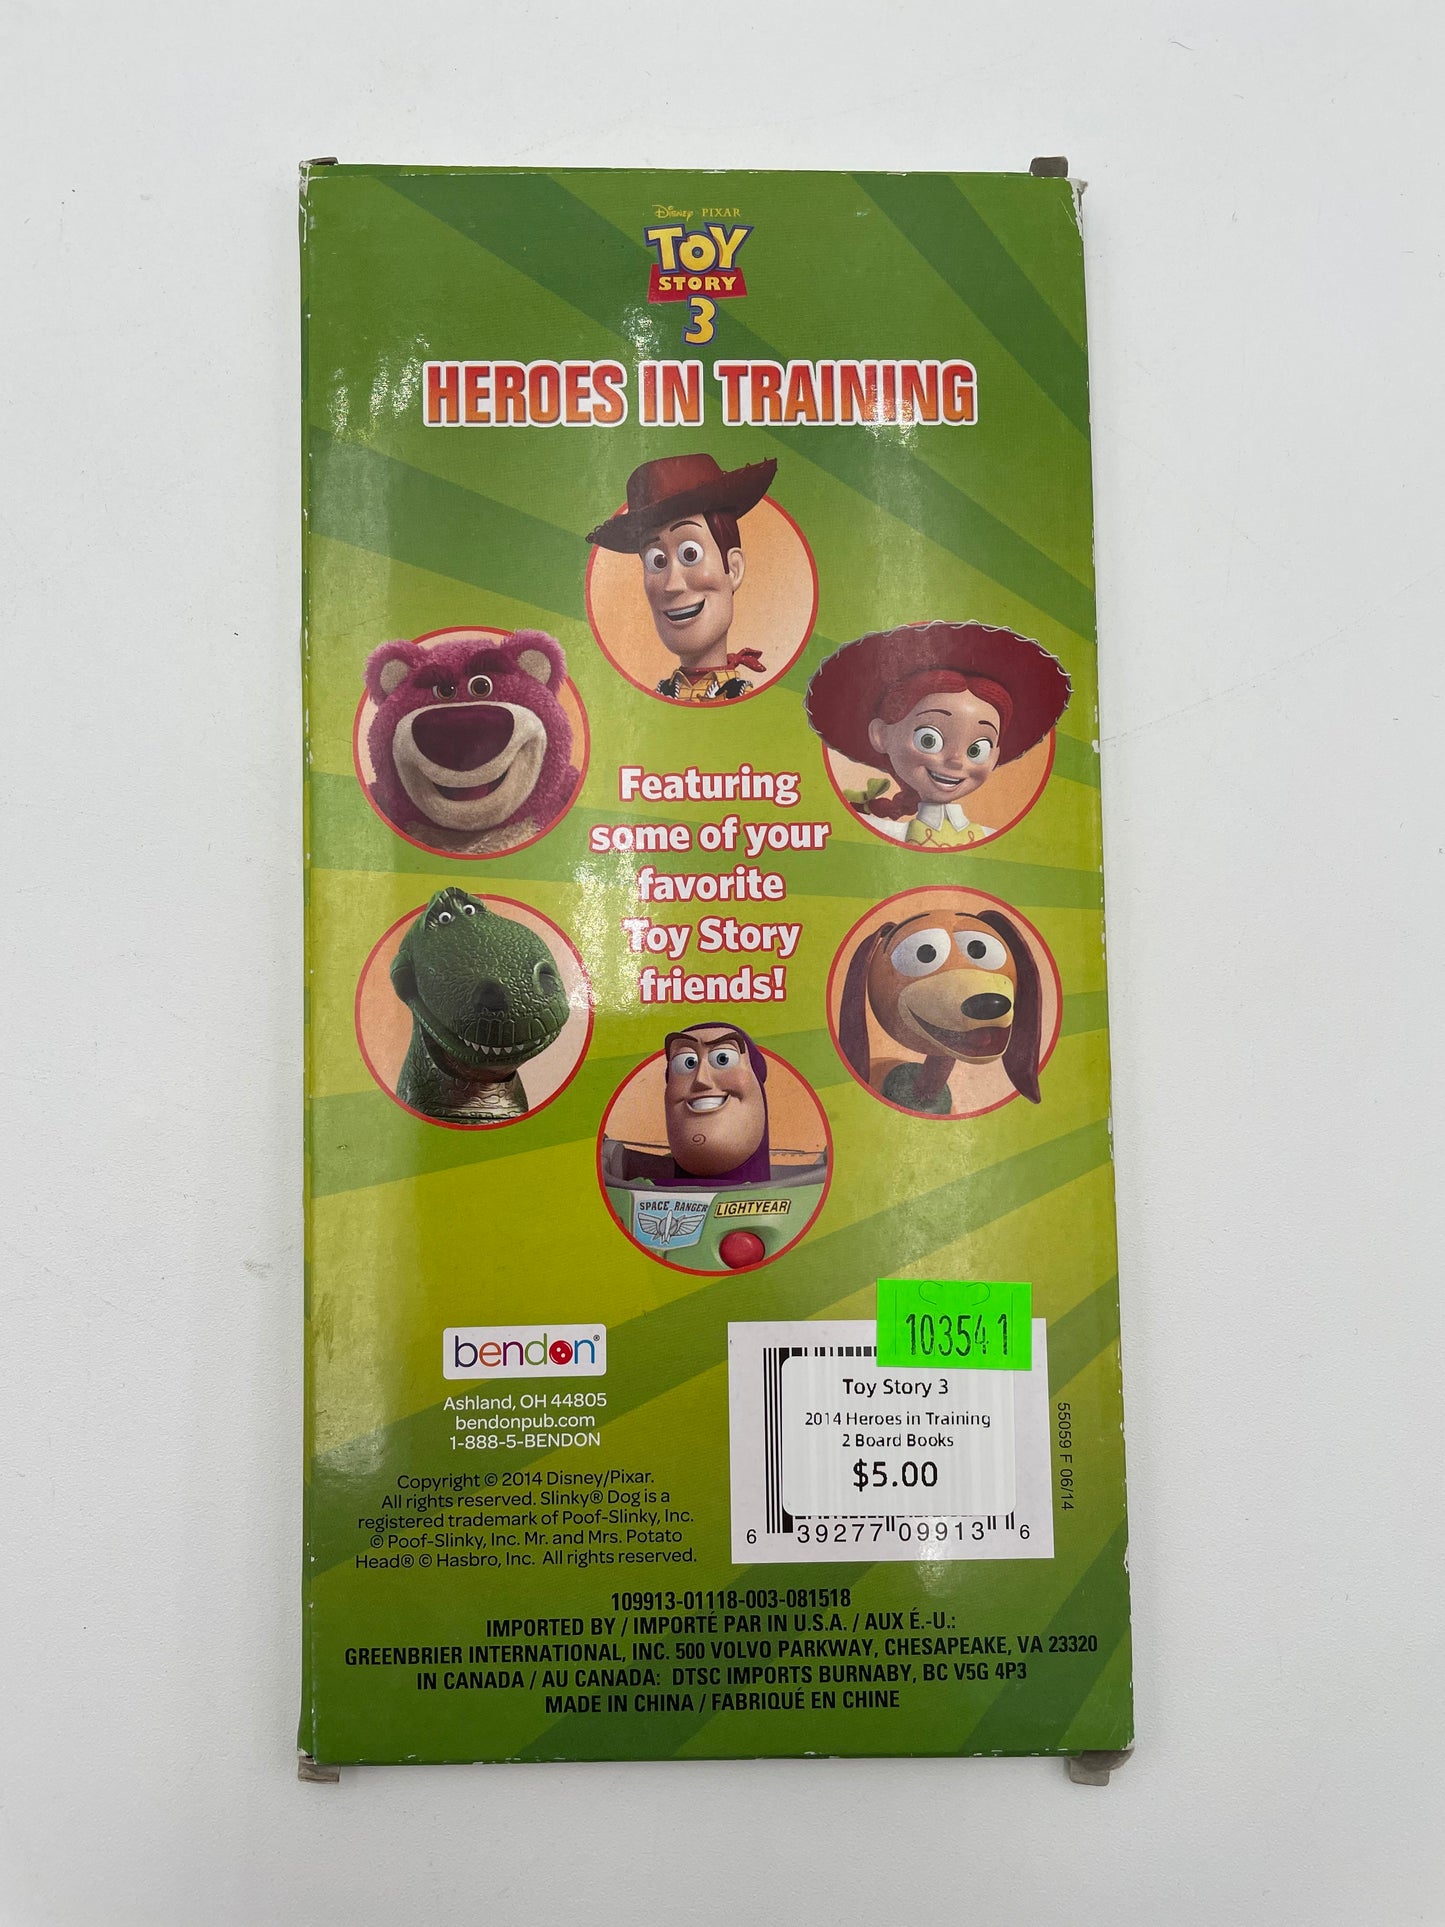 Toy Story 3 - Heroes in Training - Two Board Books 2014 #103541